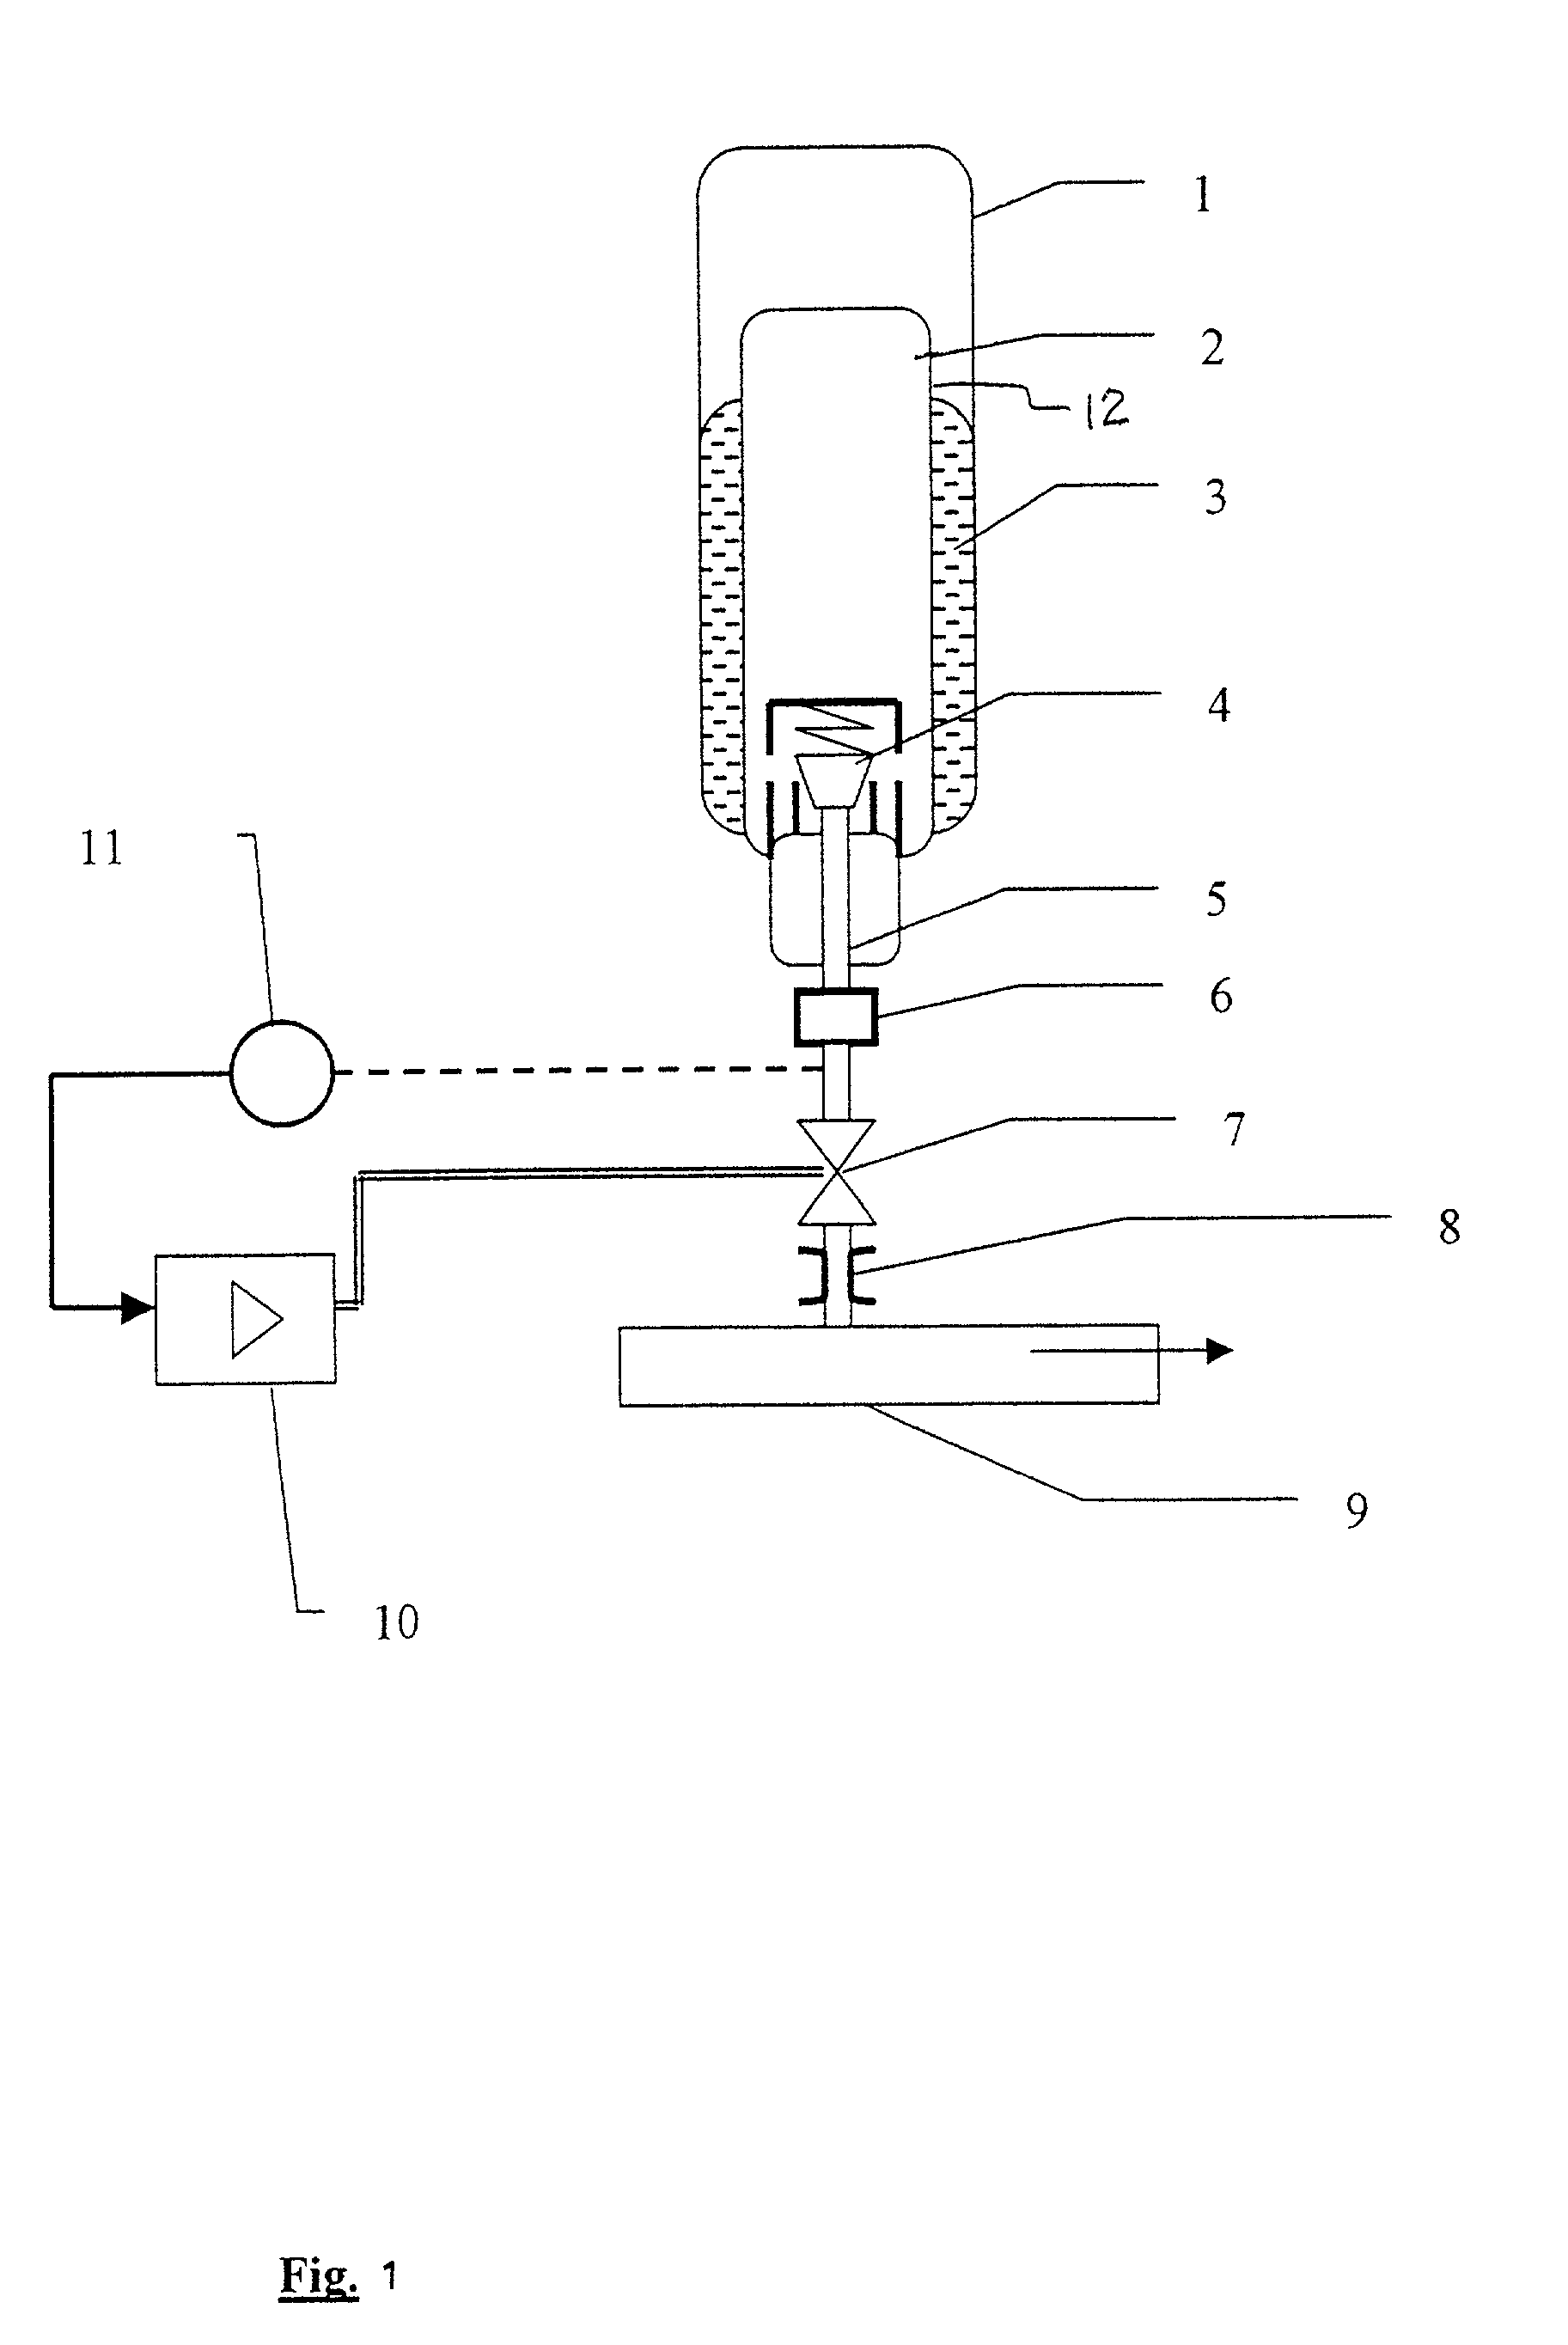 Anesthetic metering system